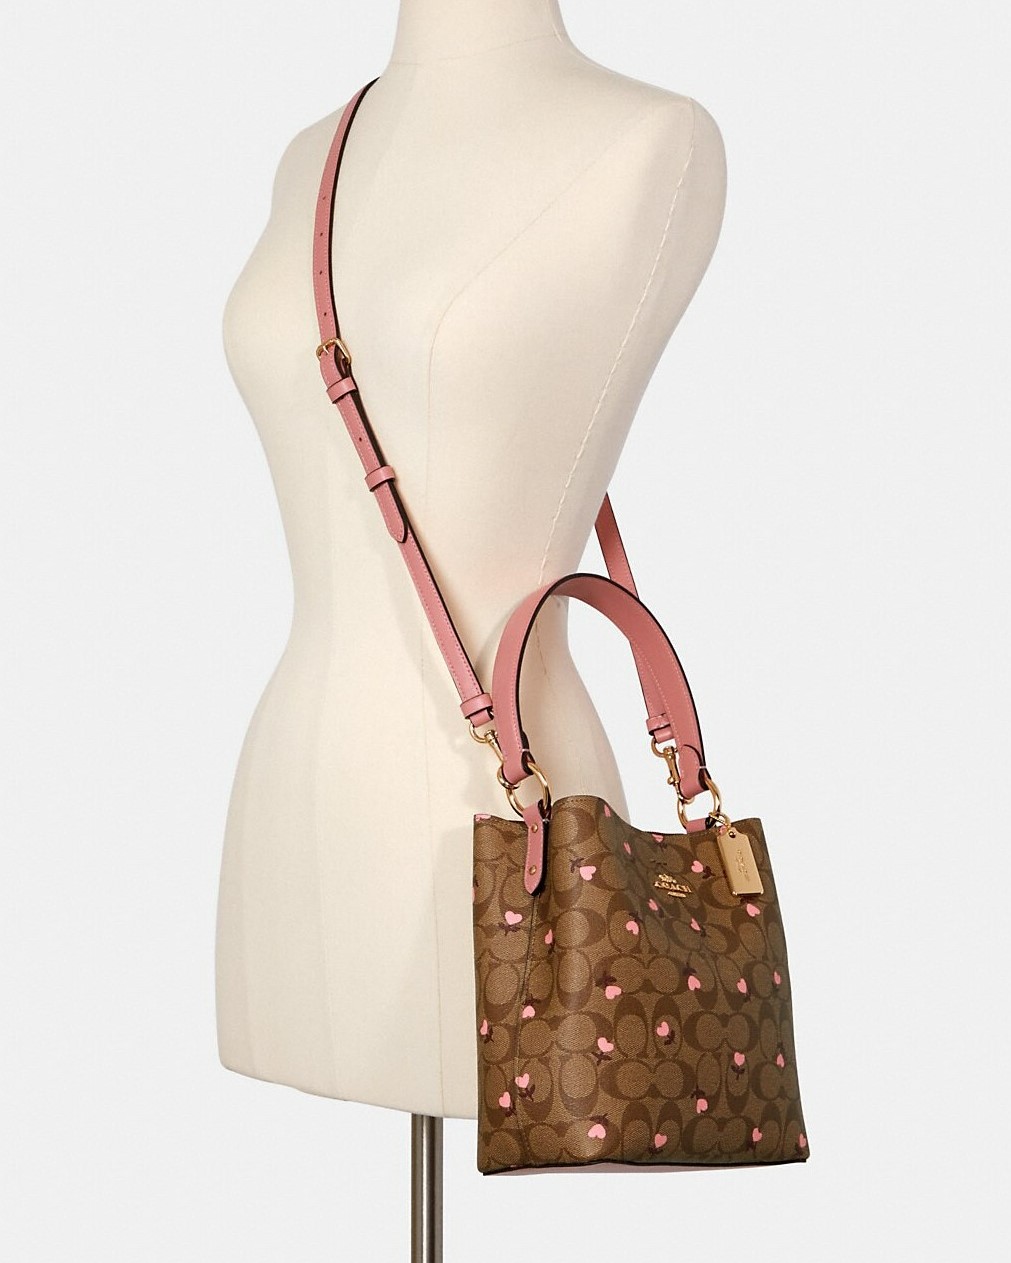 TÚI XÁCH COACH NỮ SMALL TOWN BUCKET BAG IN SIGNATURE CANVAS WITH HEART FLORAL PRINT 3